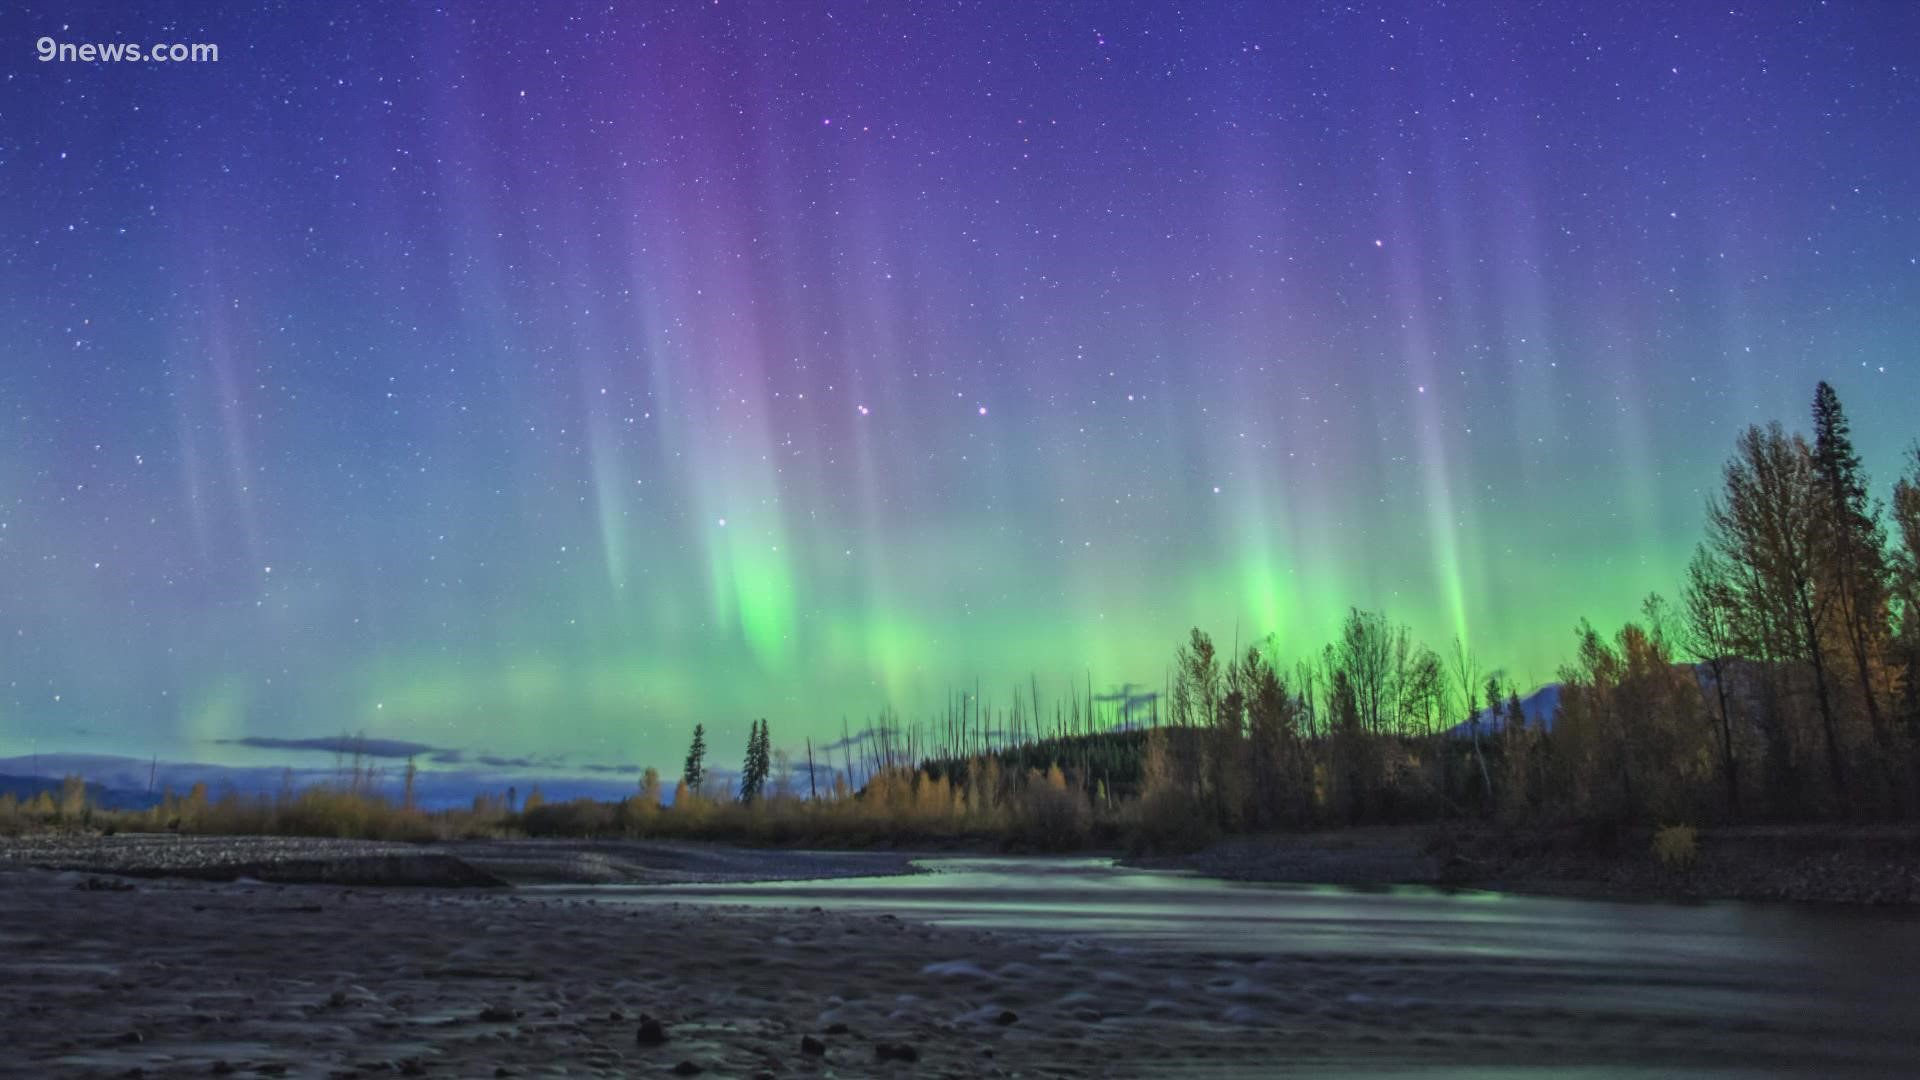 Northern lights may be visible in Colorado